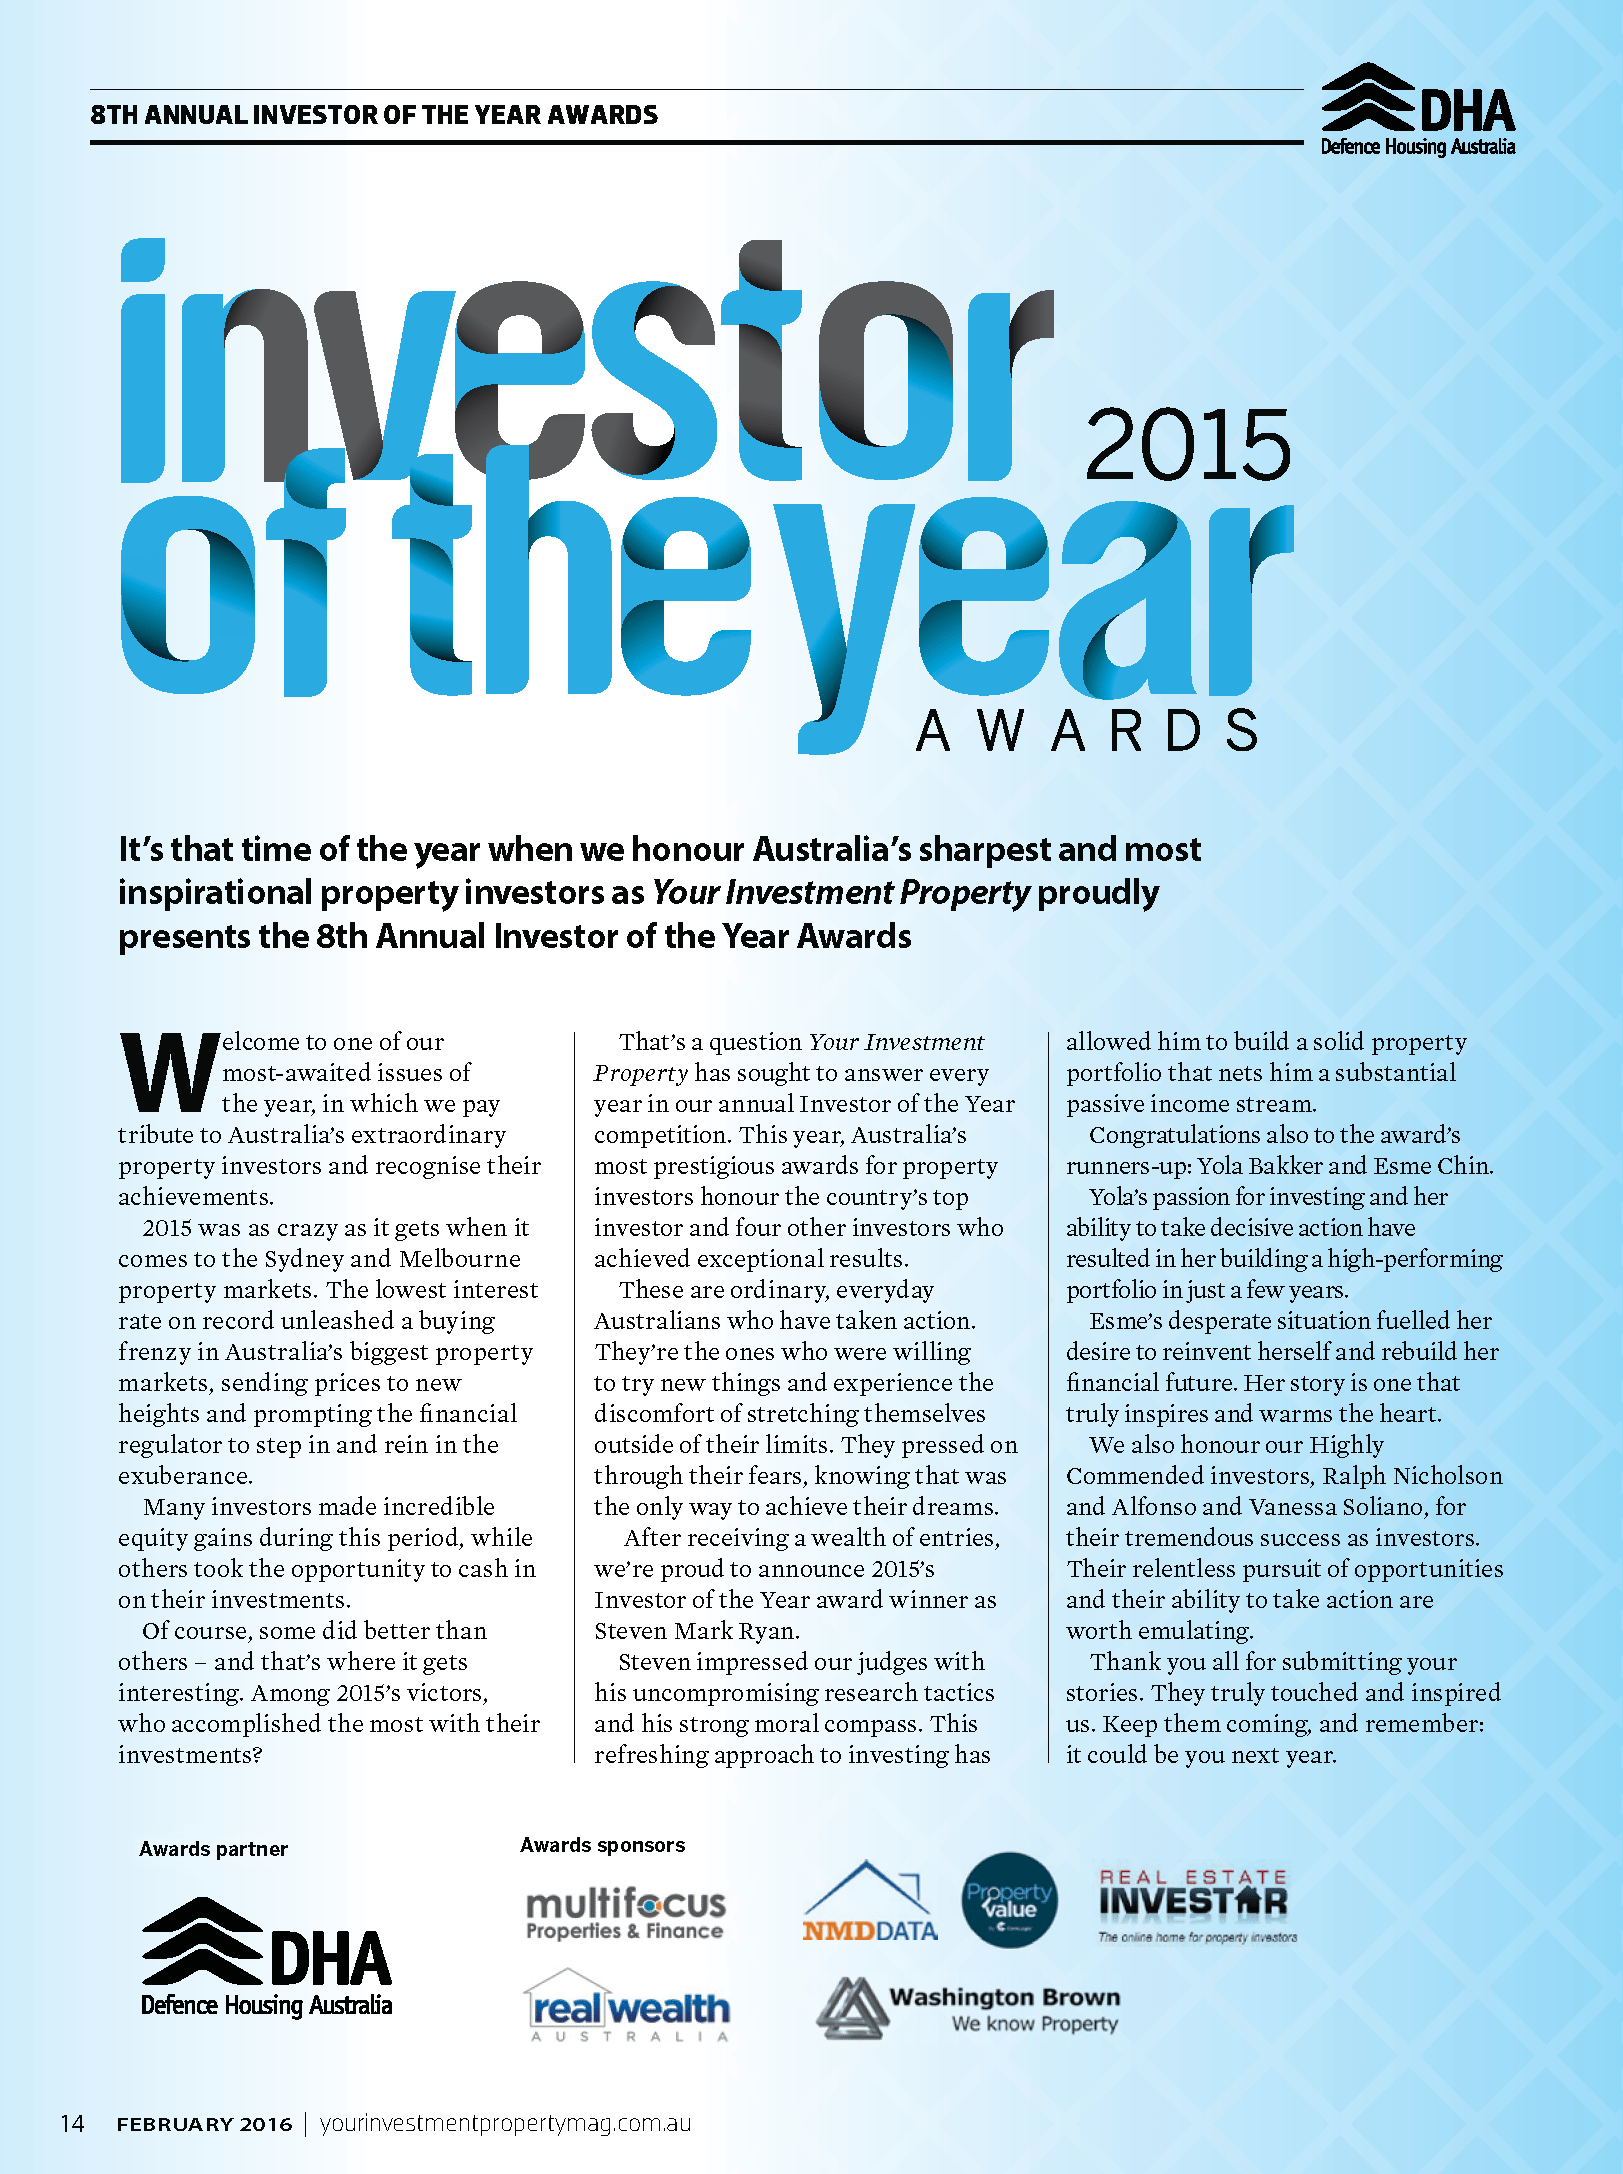 Helen judging the Investor of The Year 2015